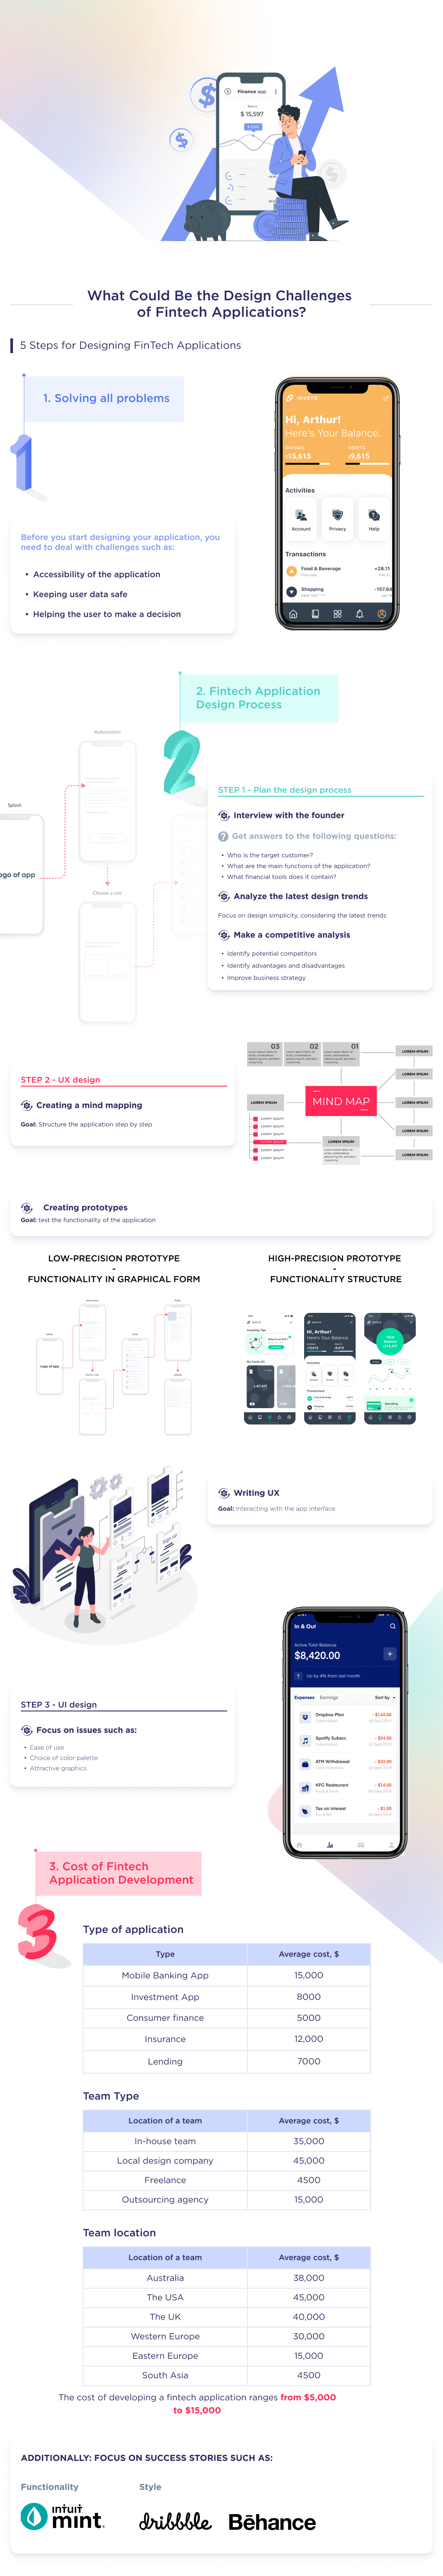 This infographic demonstrates the key steps to help design for a Fintech app with successful examples of apps from the field